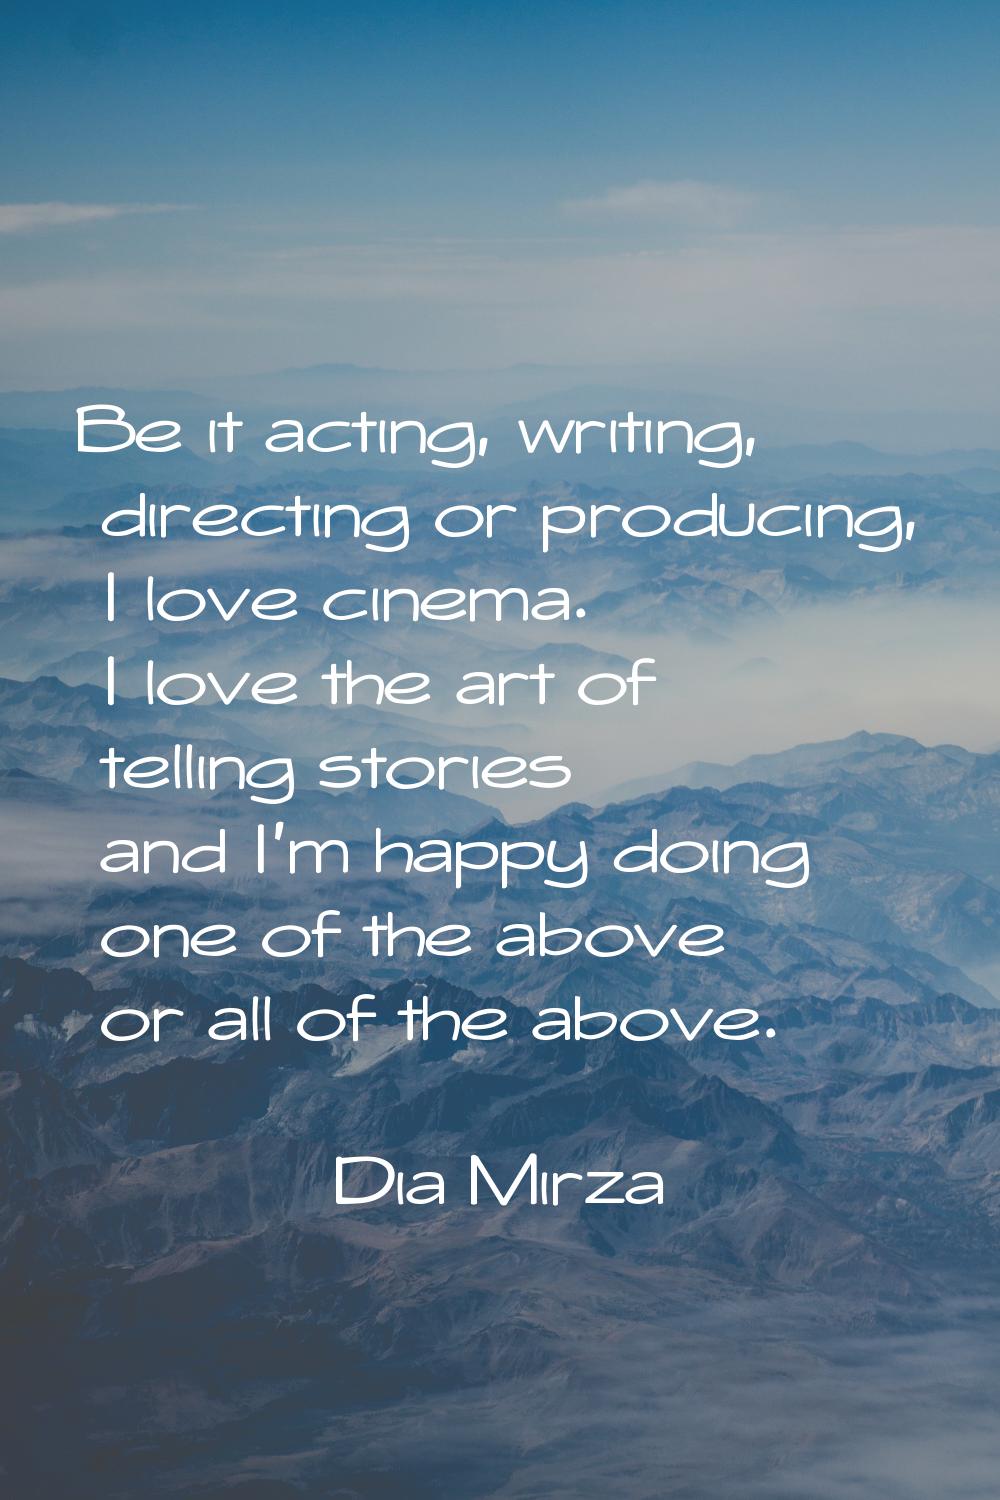 Be it acting, writing, directing or producing, I love cinema. I love the art of telling stories and